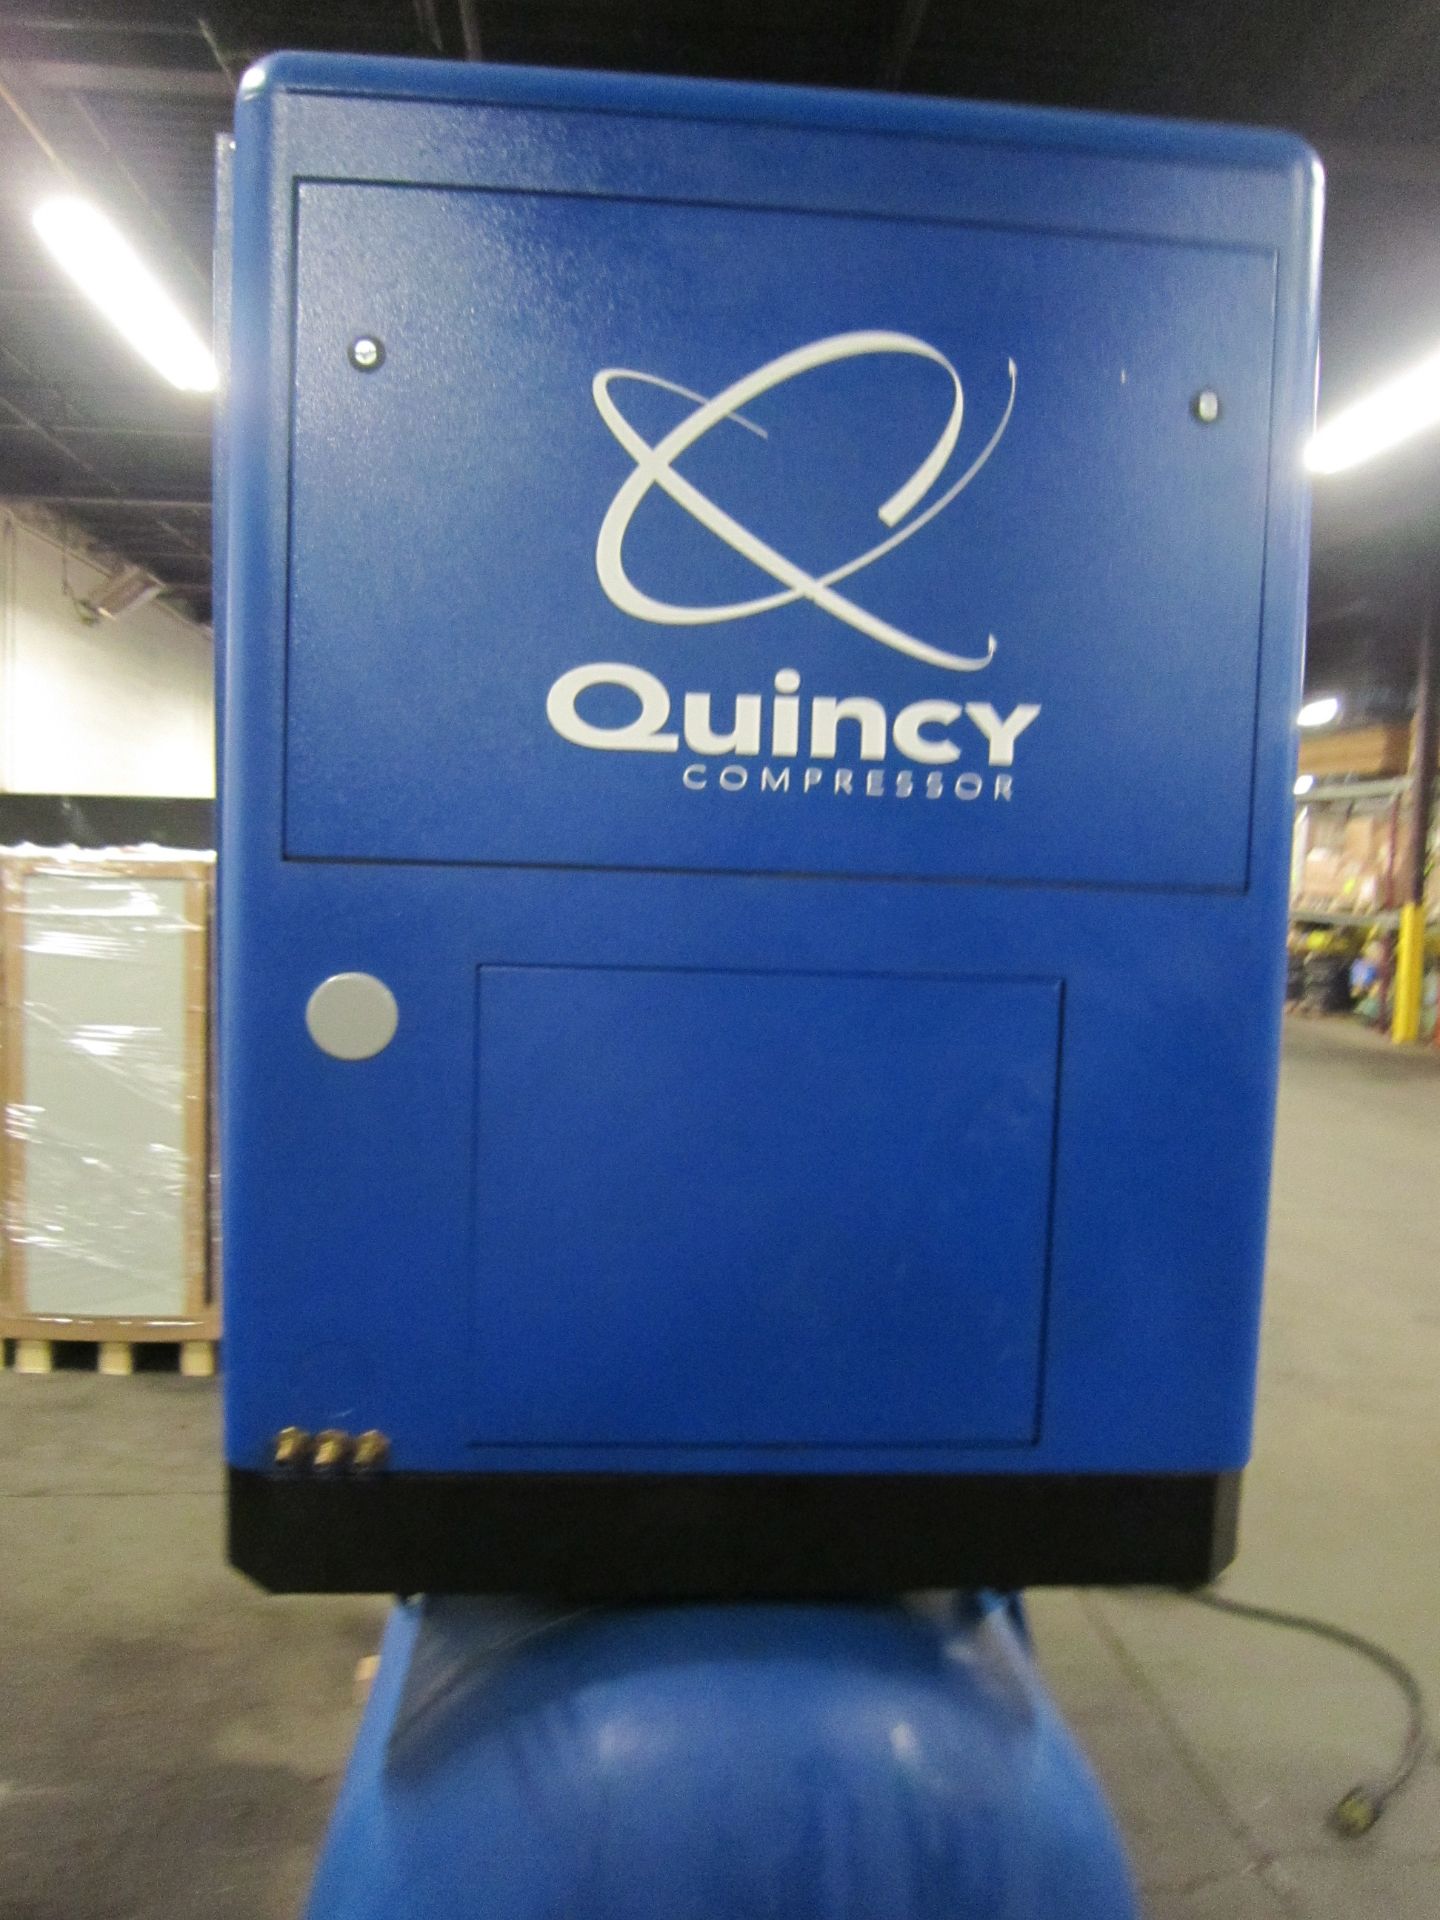 2006 Quincy 30HP Rotary Screw Air Compressor - 3 phase with horizontal pressurized tank - Image 3 of 3